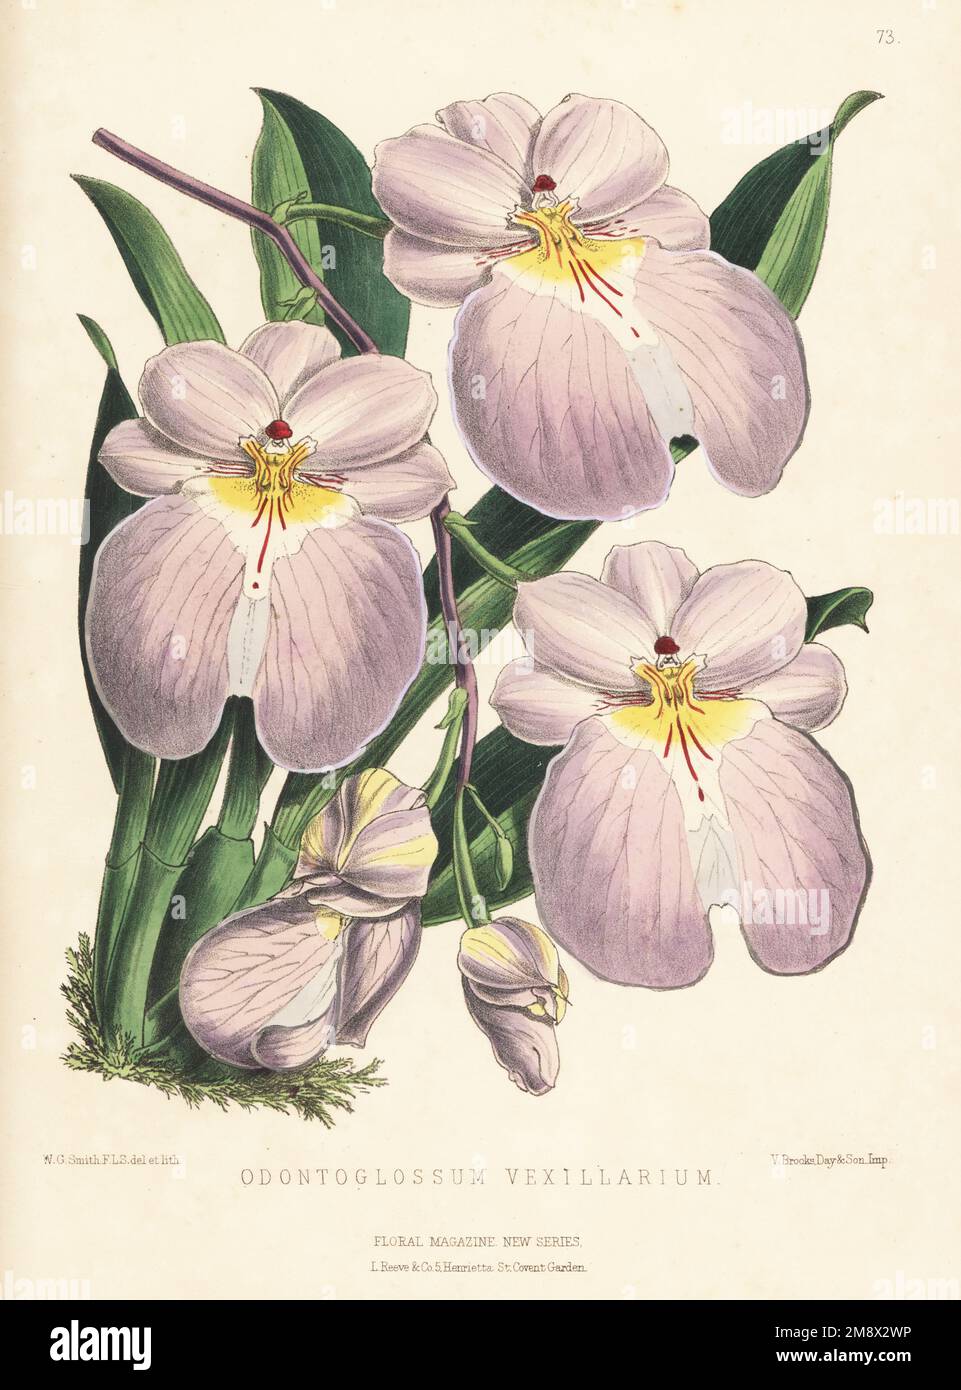 Flag-like Miltoniopsis orchid, Miltoniopsis vexillaria, native to Colombia and Ecuador. As Odontoglossum vexillarium, from a specimen raised by Veitch and Sons nursery, King's Road, Chelsea. Handcolored botanical illustration drawn and lithographed by Worthington George Smith from Henry Honywood Dombrain's Floral Magazine, New Series, Volume 2, L. Reeve, London, 1873. Lithograph printed  by Vincent Brooks, Day & Son. Stock Photo